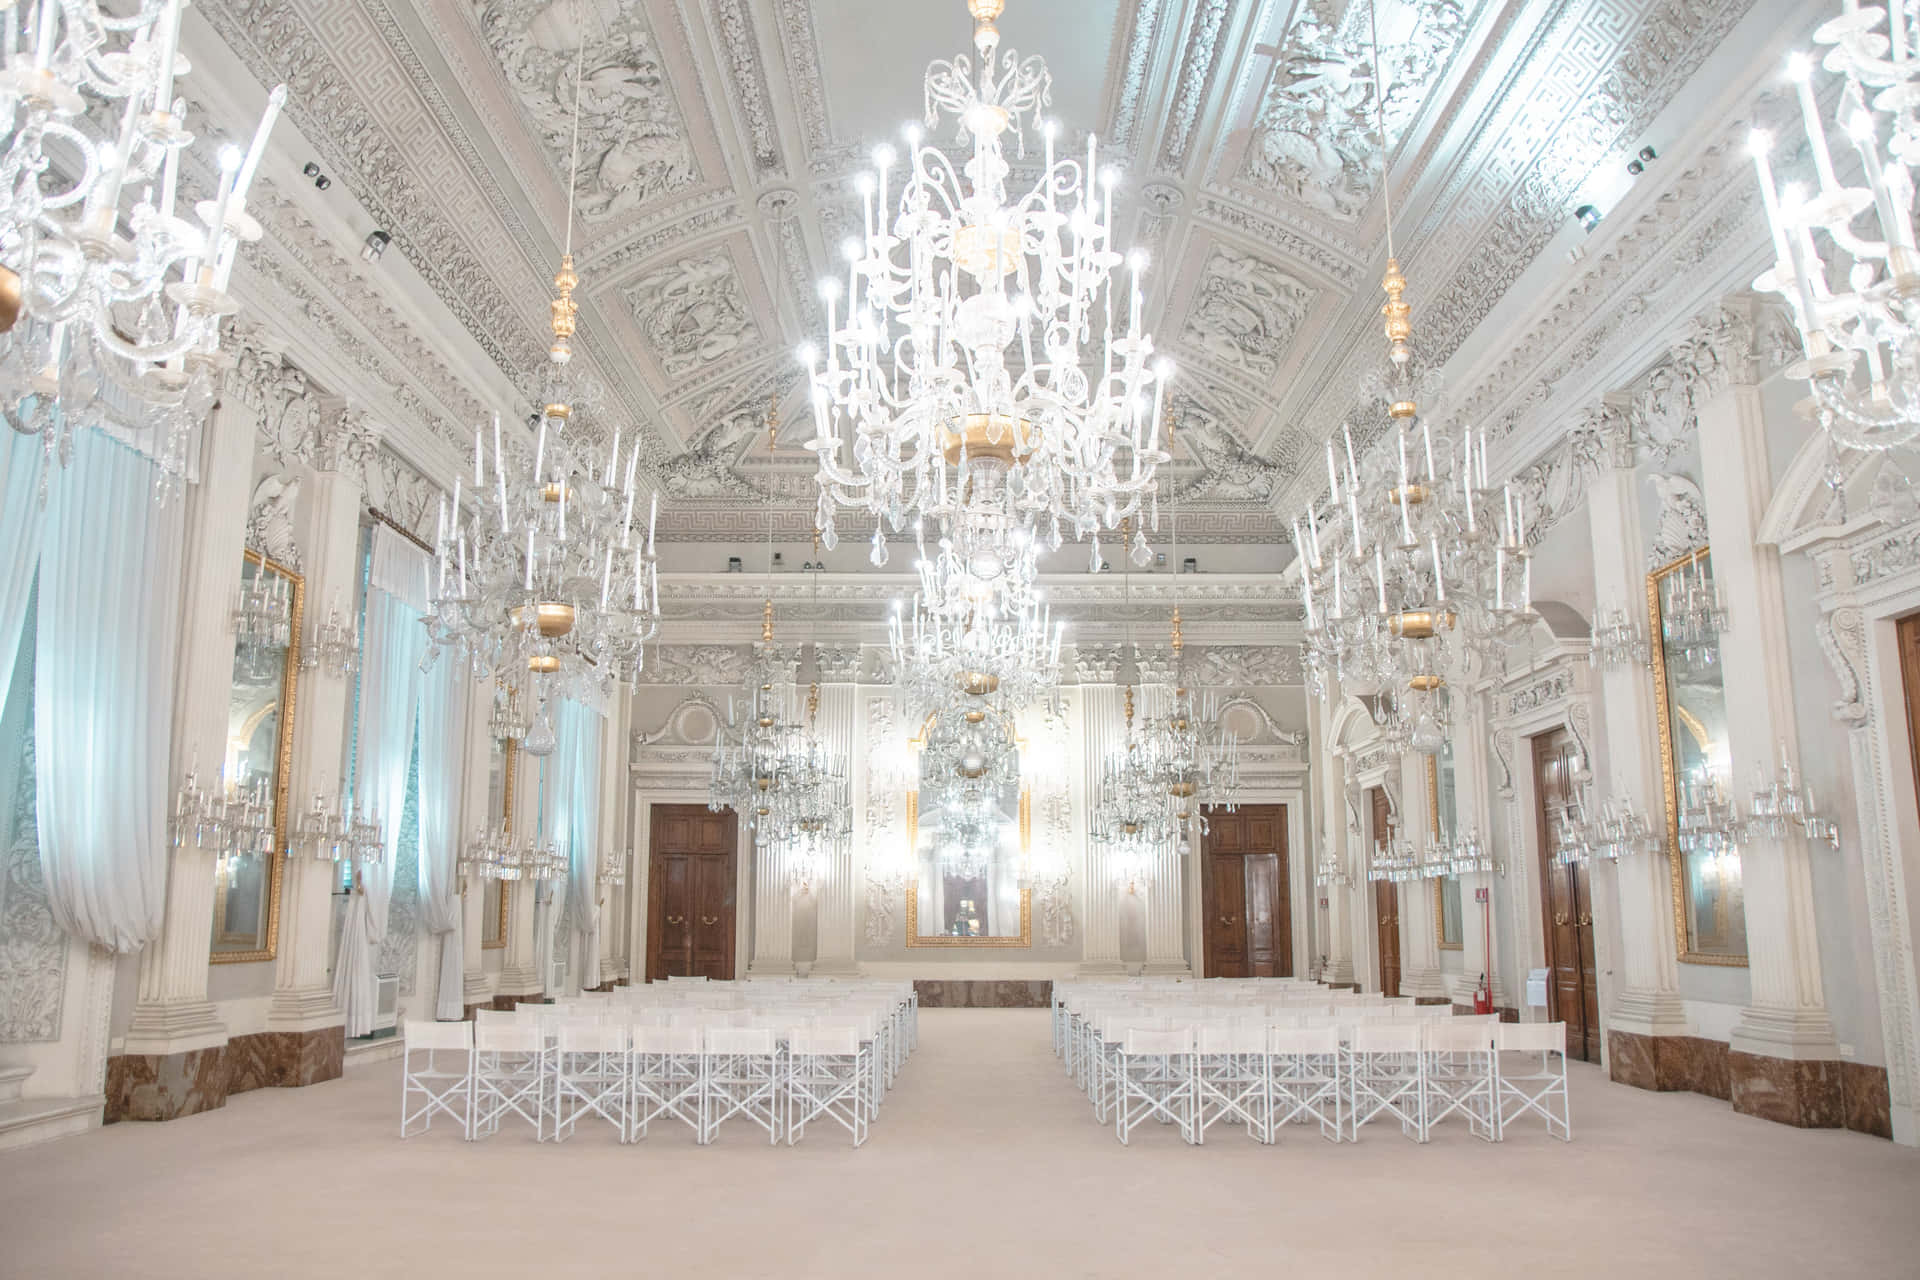 A Large Room With White Chairs And Chandeliers